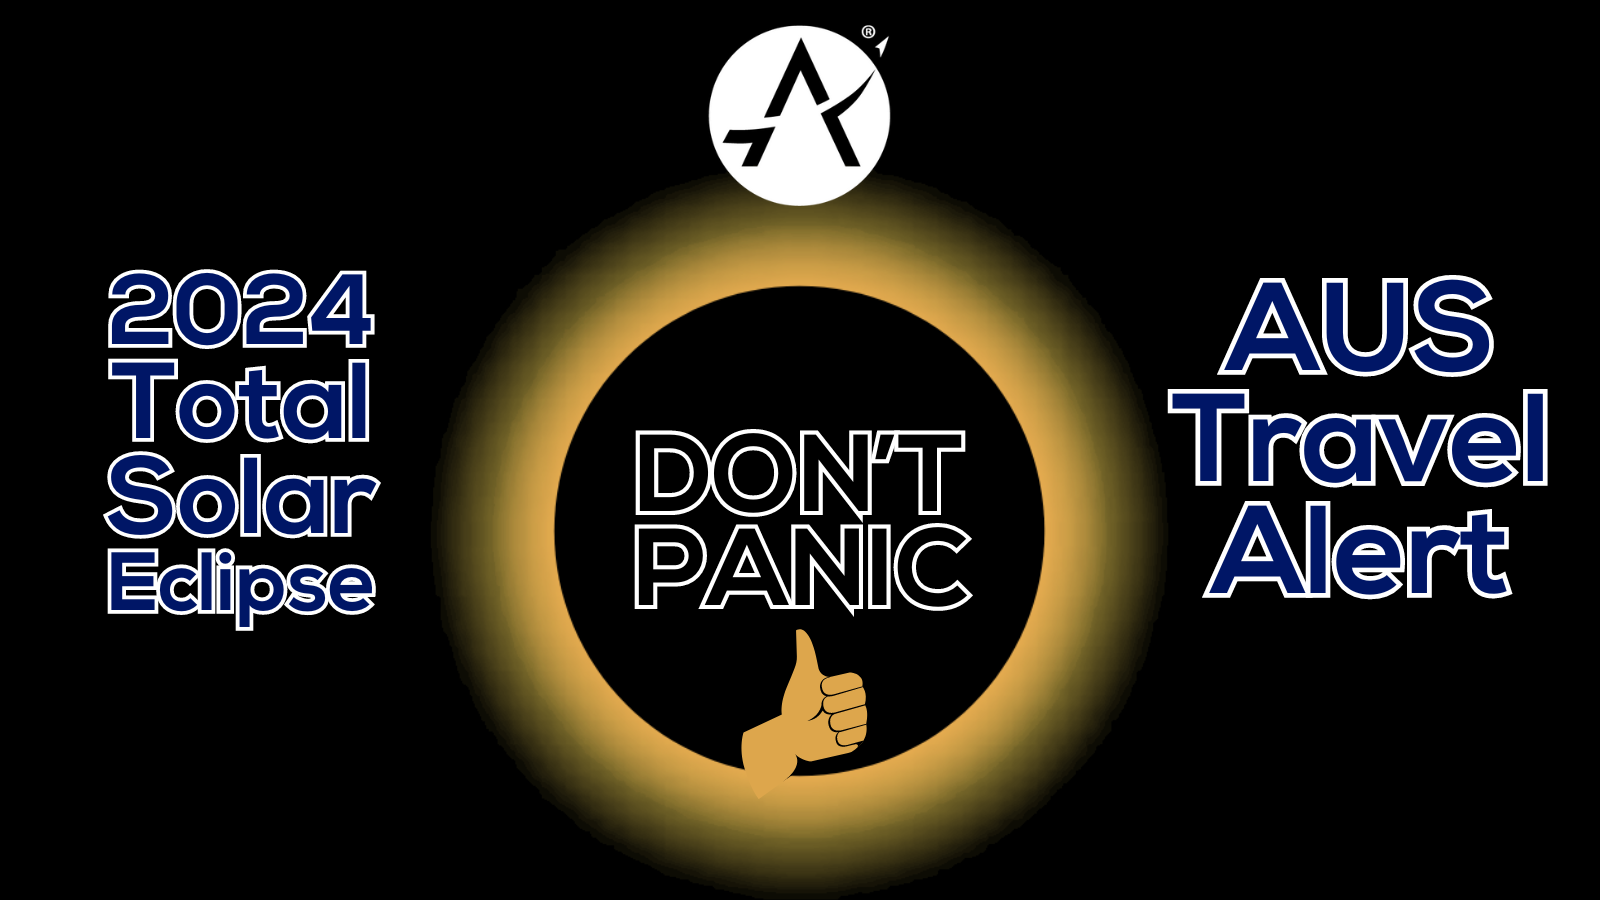 Graphic of a total solar eclipse and a thumbs up in the middle of it. Text reads: Don't panic. 2024 total solar eclipse - AUS travel alert